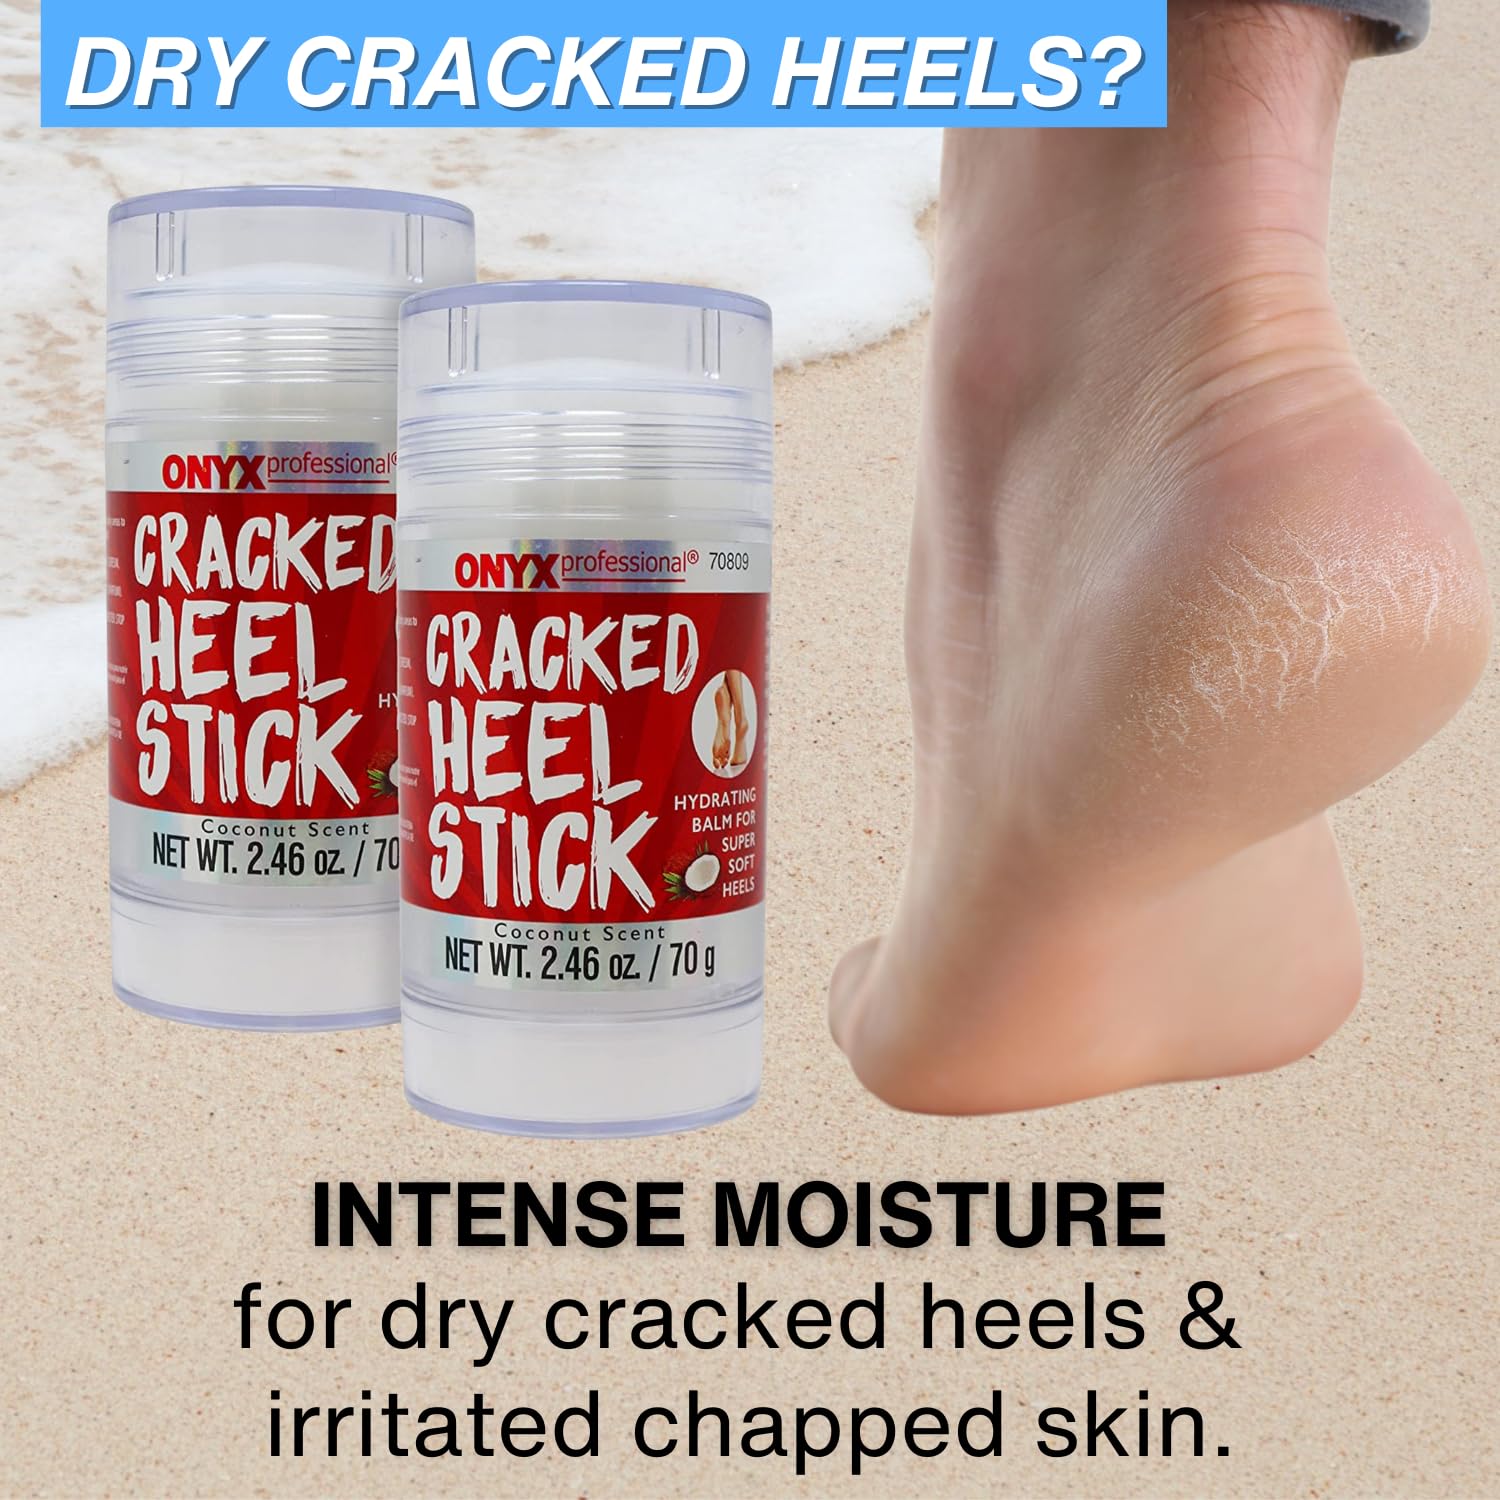 Onyx Professional Cracked Heel Repair Balm Stick (2 Pack) Dry Cracked Feet Treatment, Moisturizing Heel Balm Rolls On So No Mess Like Foot Cream or Foot Lotion, Rescues Cracked Feet for Skin So Soft